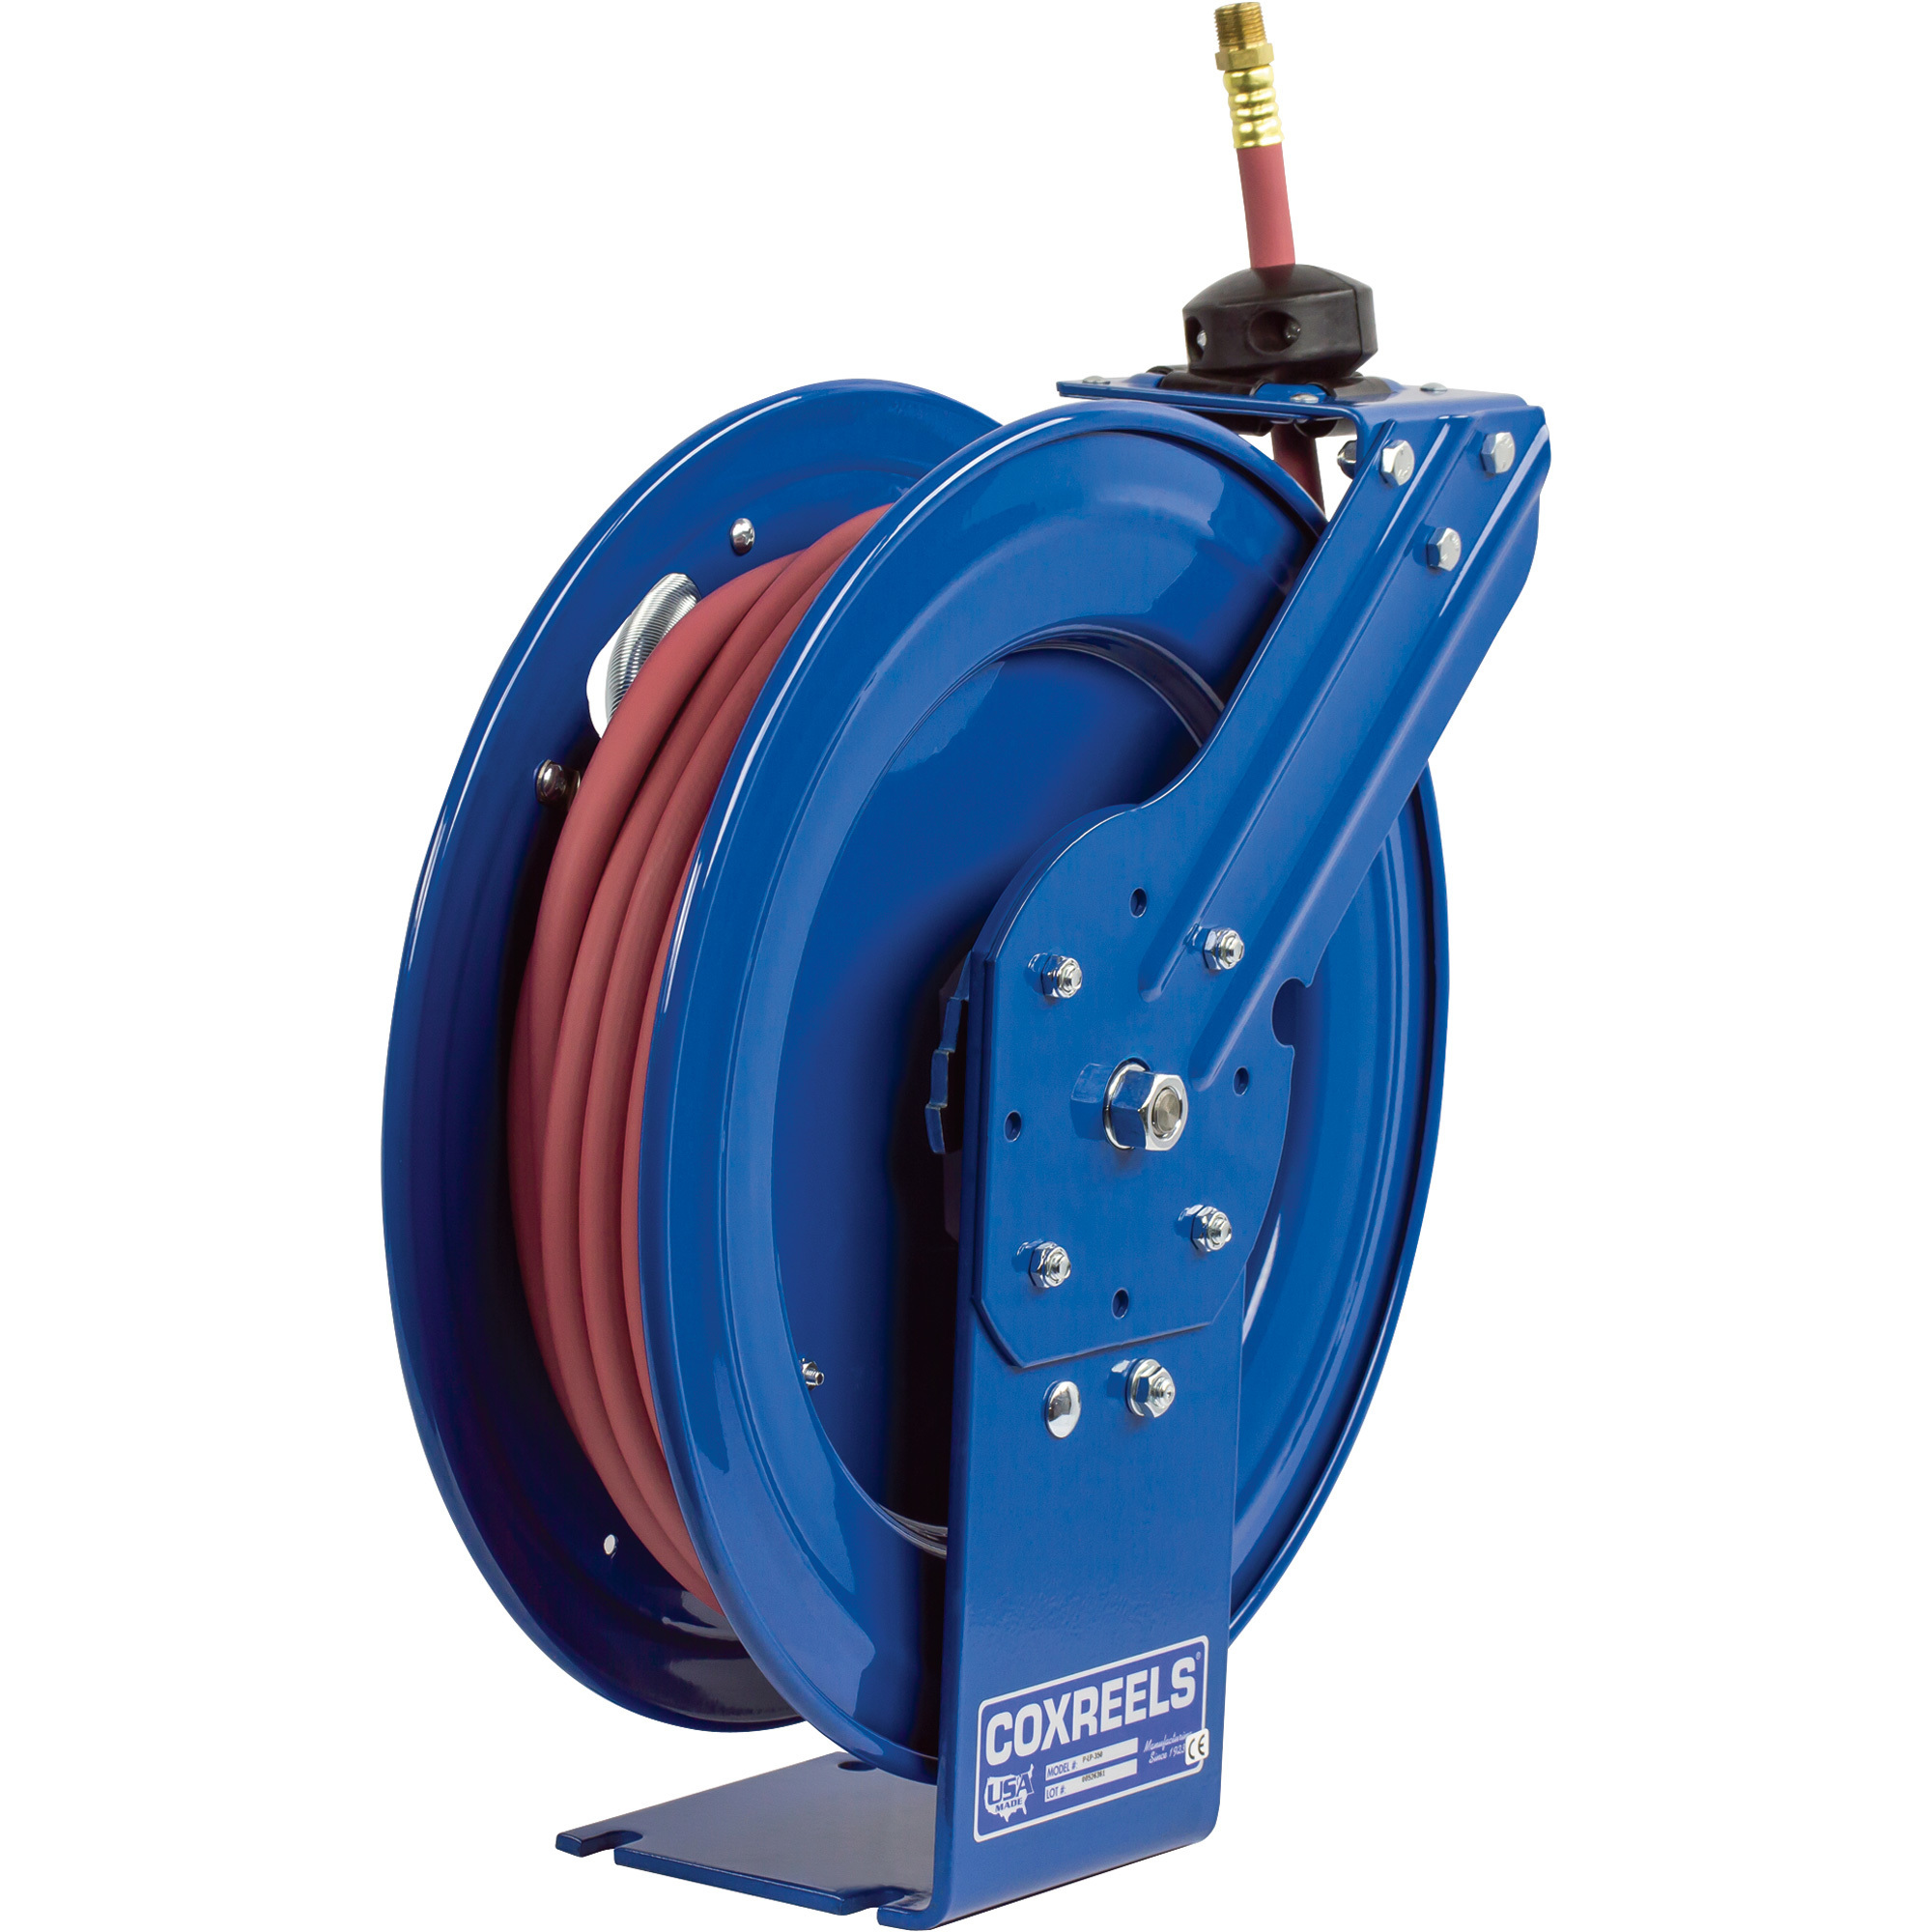 Coxreels P Series Air/Water Hose Reel, With 1/4Inch x 25ft. PVC Hose, Max. 300 PSI, Model P-LP-125